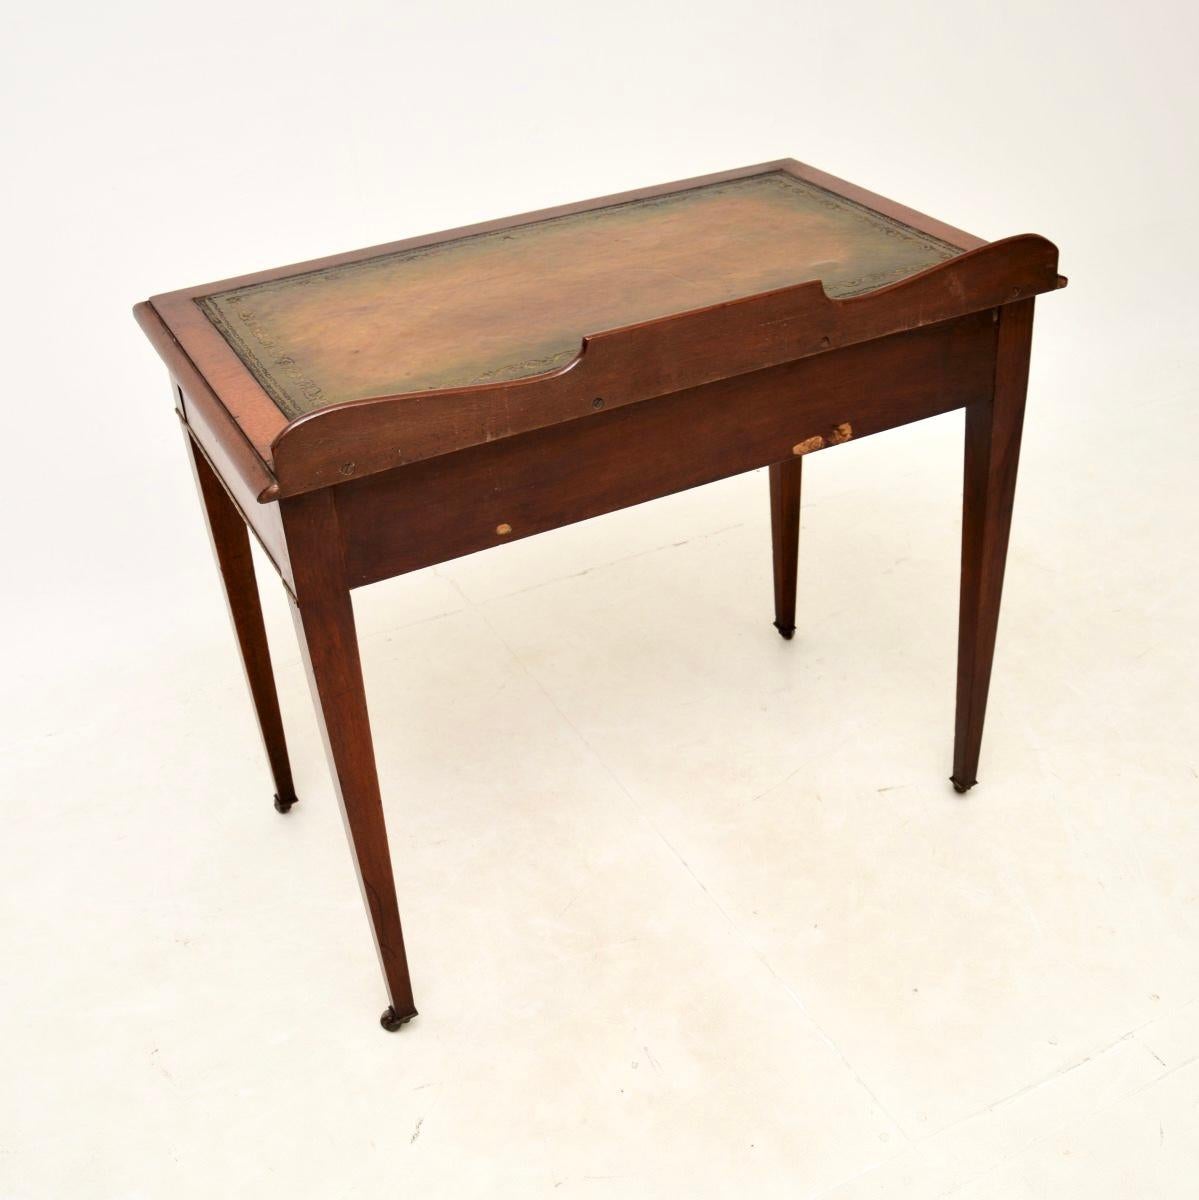 Late 19th Century Antique Edwardian Desk / Writing Table For Sale